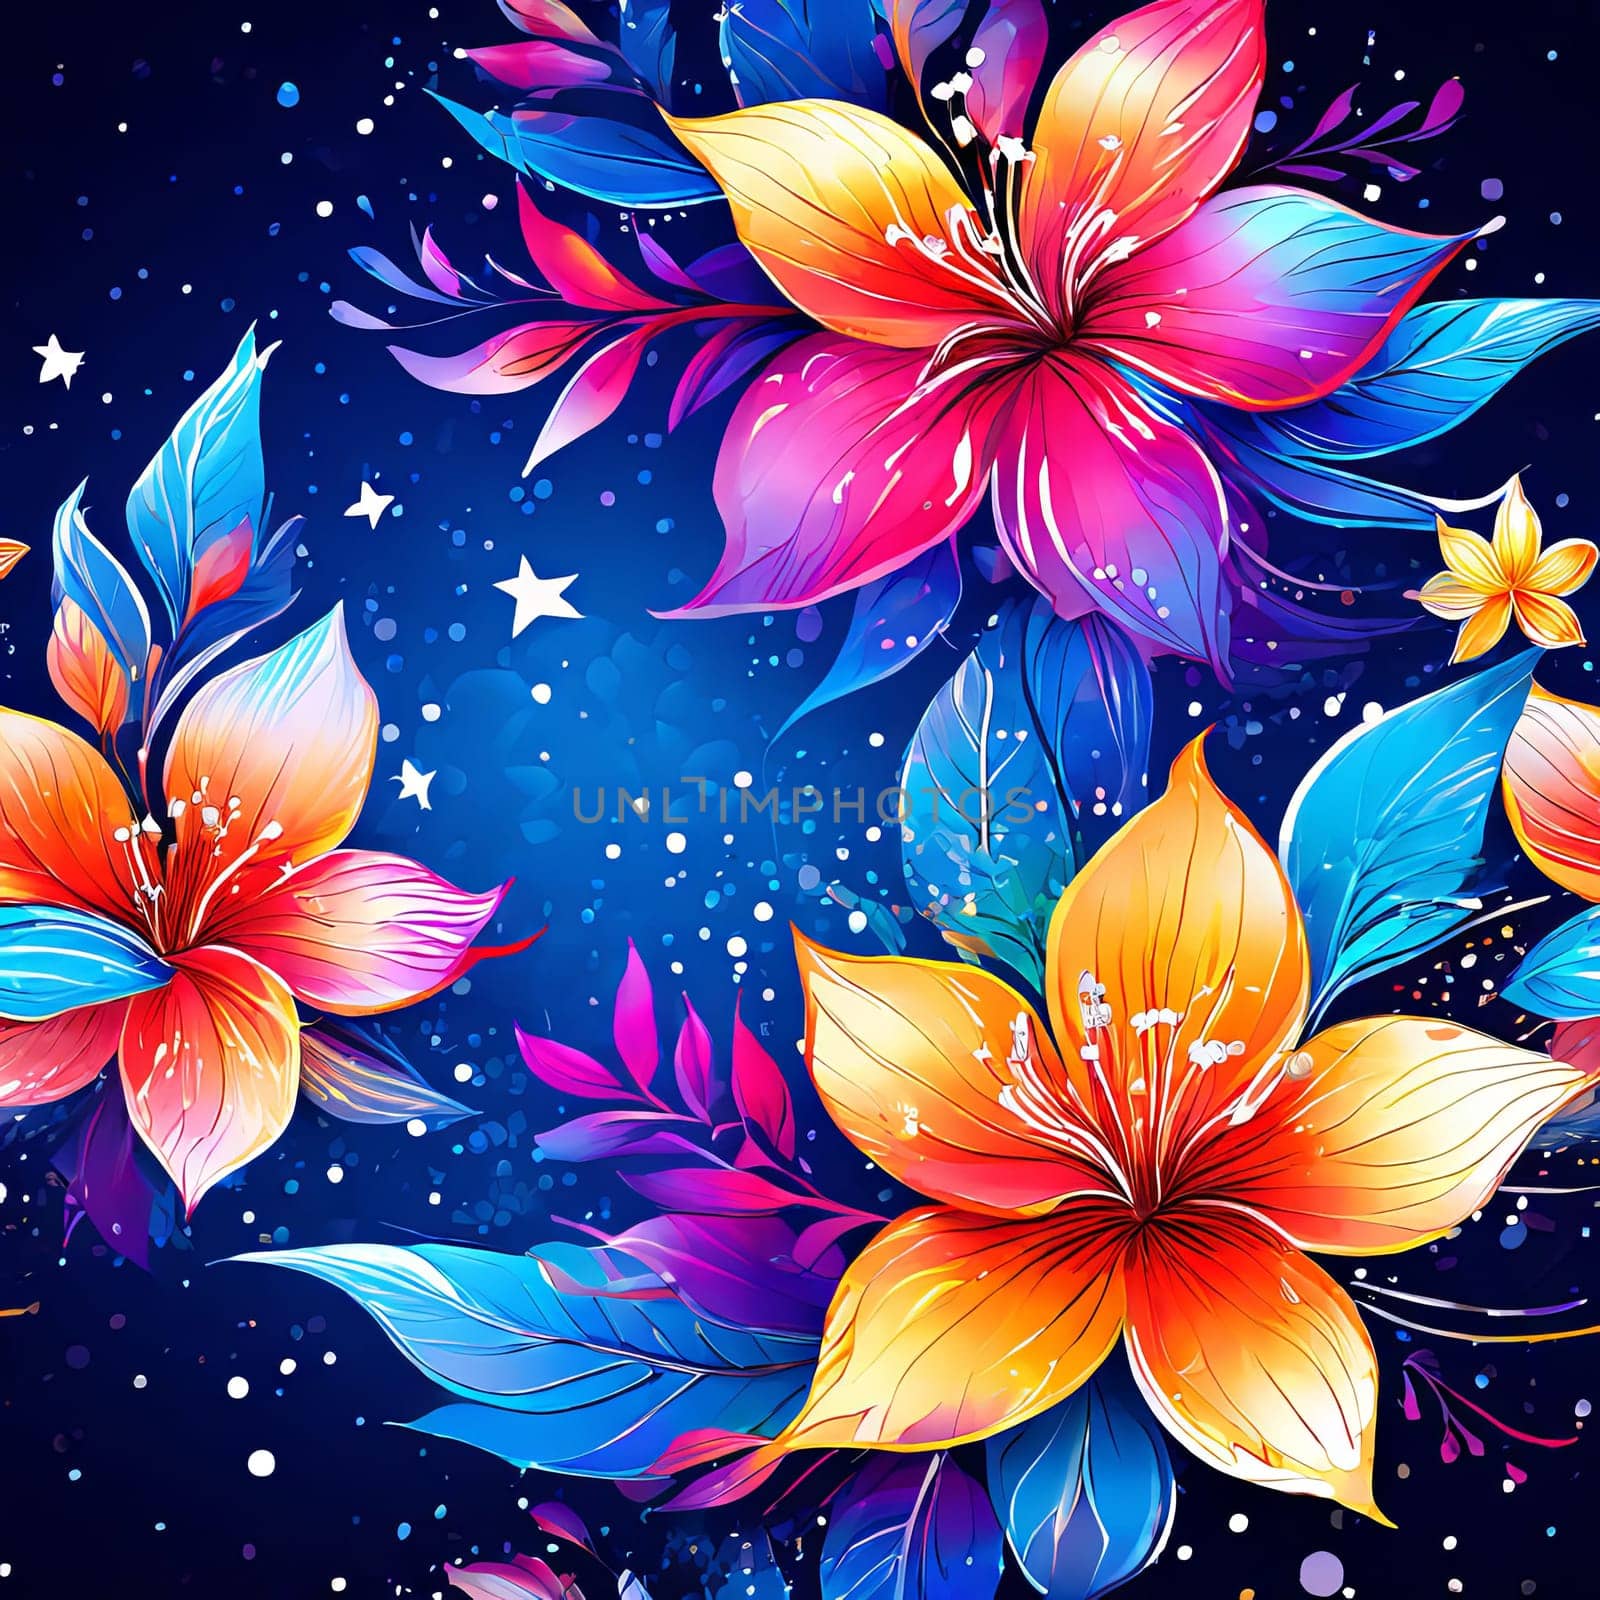 Striking, colorful flower painting with intricate details, vivid hues, beautifully contrasted against dark, black background. For interior design, textiles, clothing, gift wrapping, web design, print